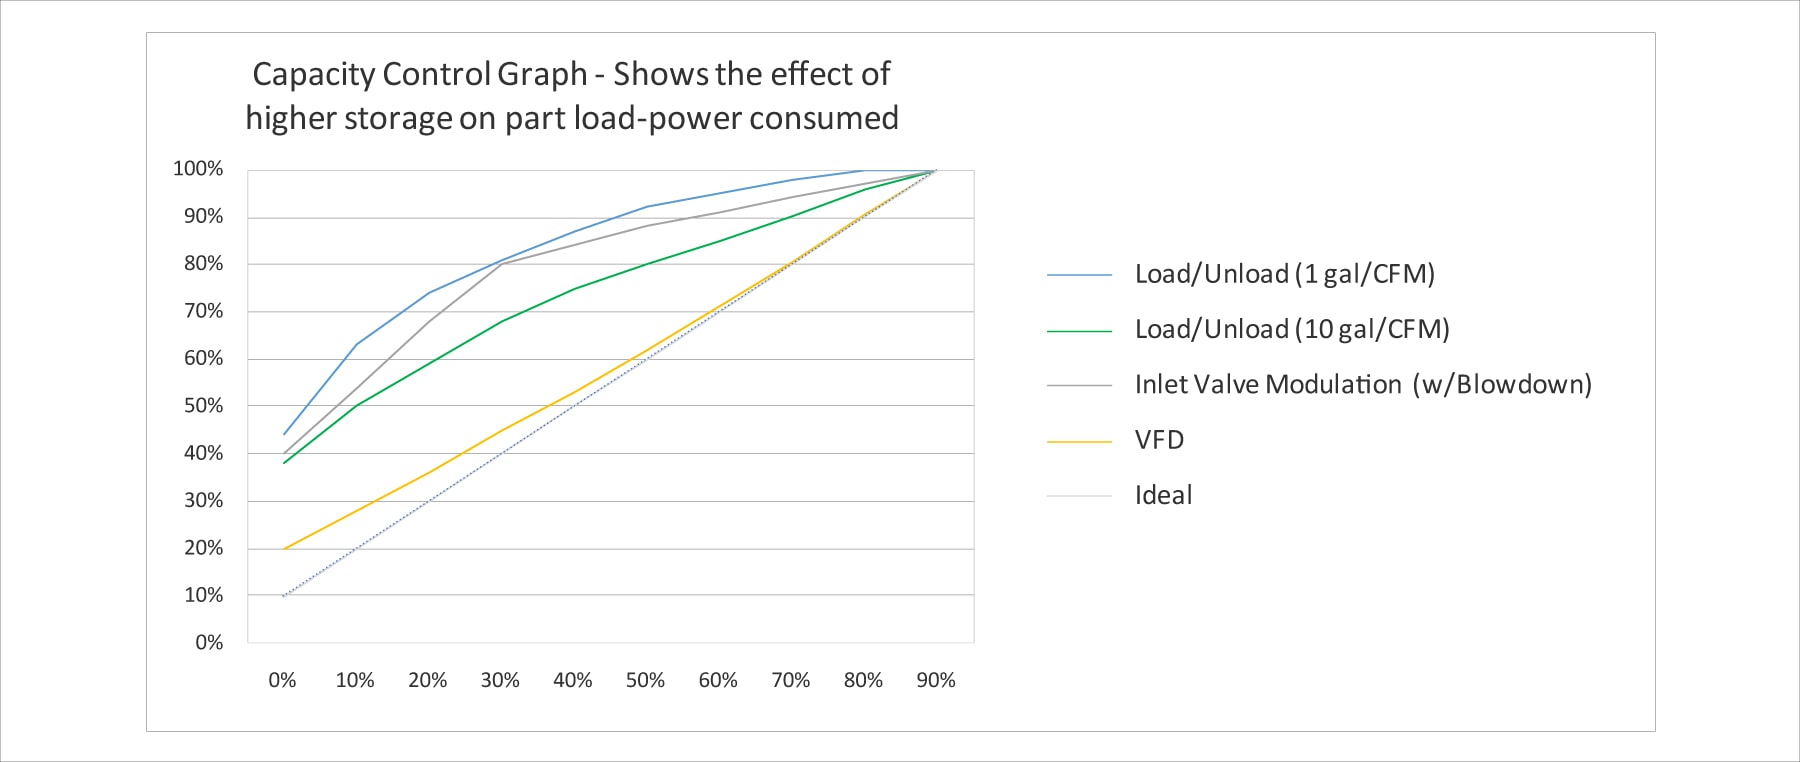 Capacity control graph - Show the effect of higher storage on part load-power consumed